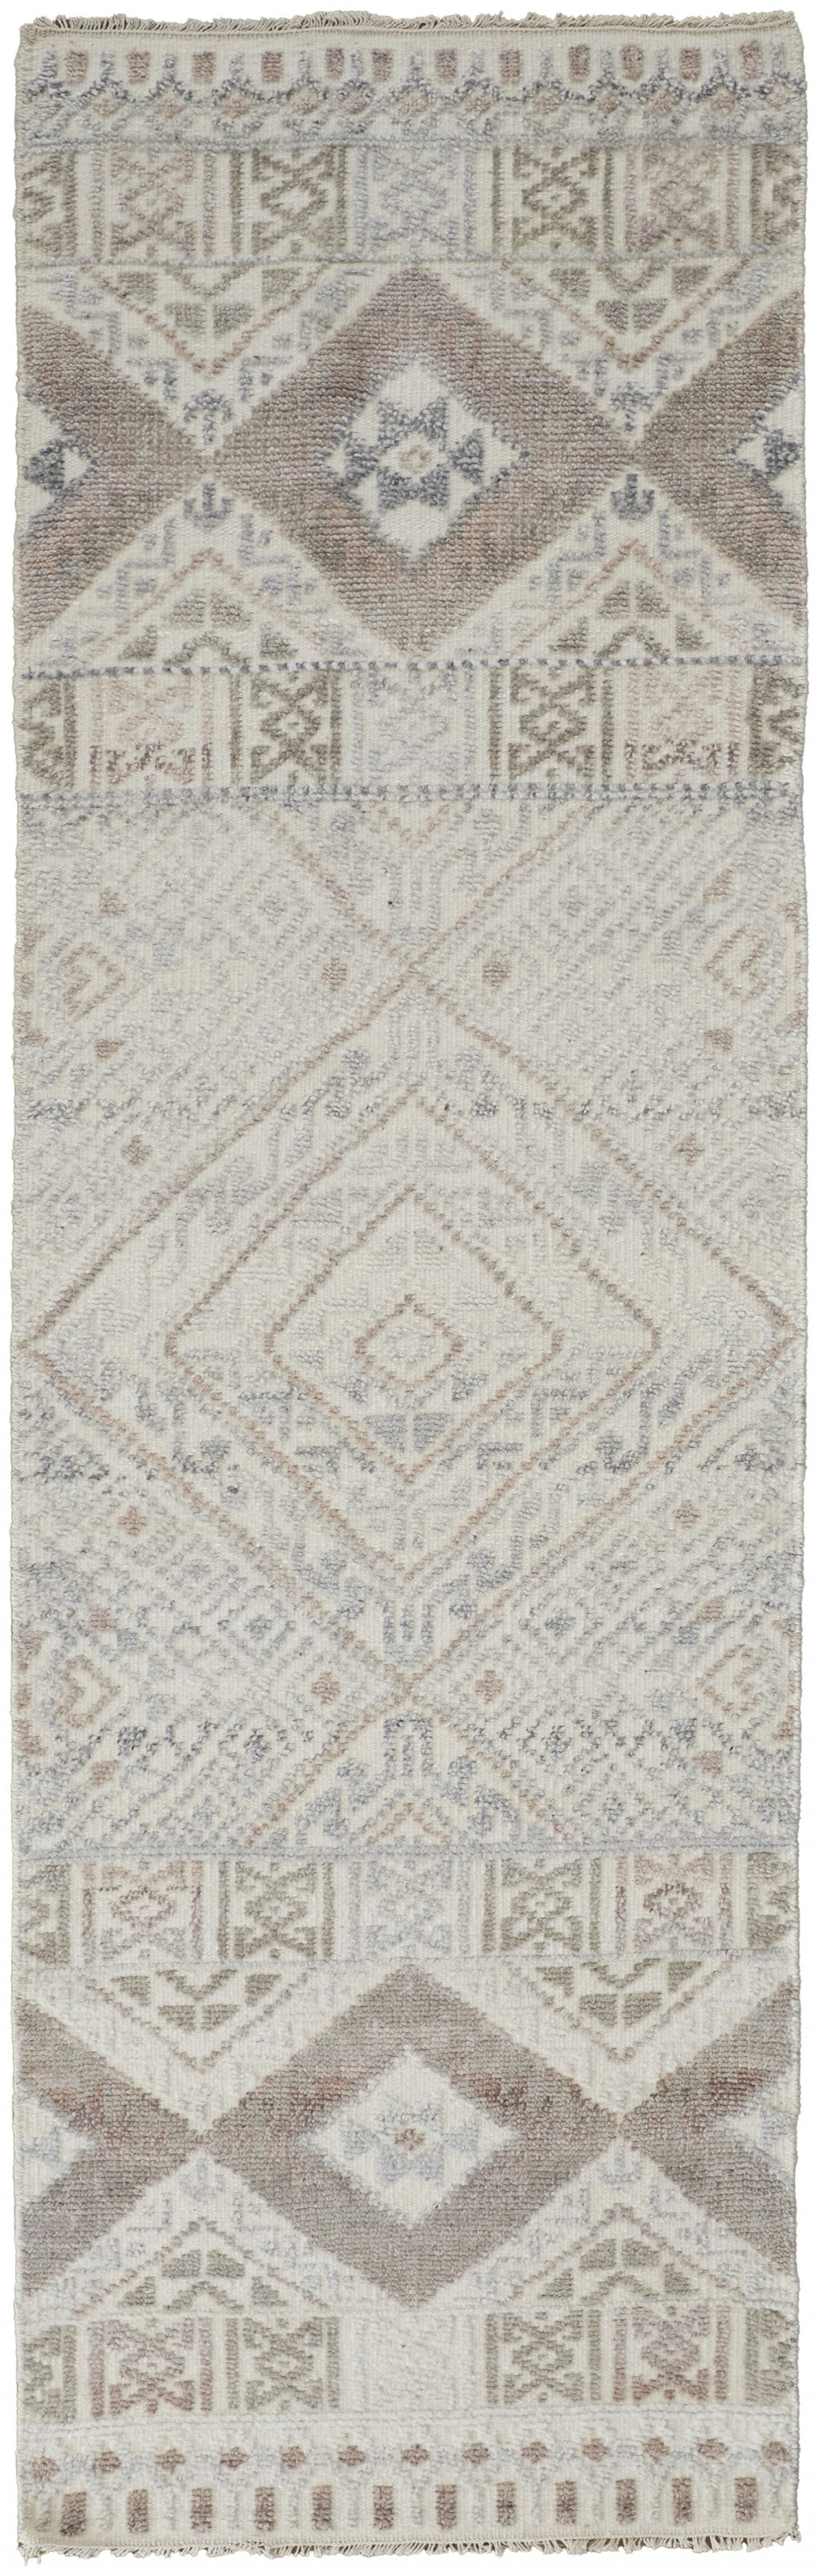 8' X 10' Gray Ivory And Pink Geometric Hand Knotted Area Rug